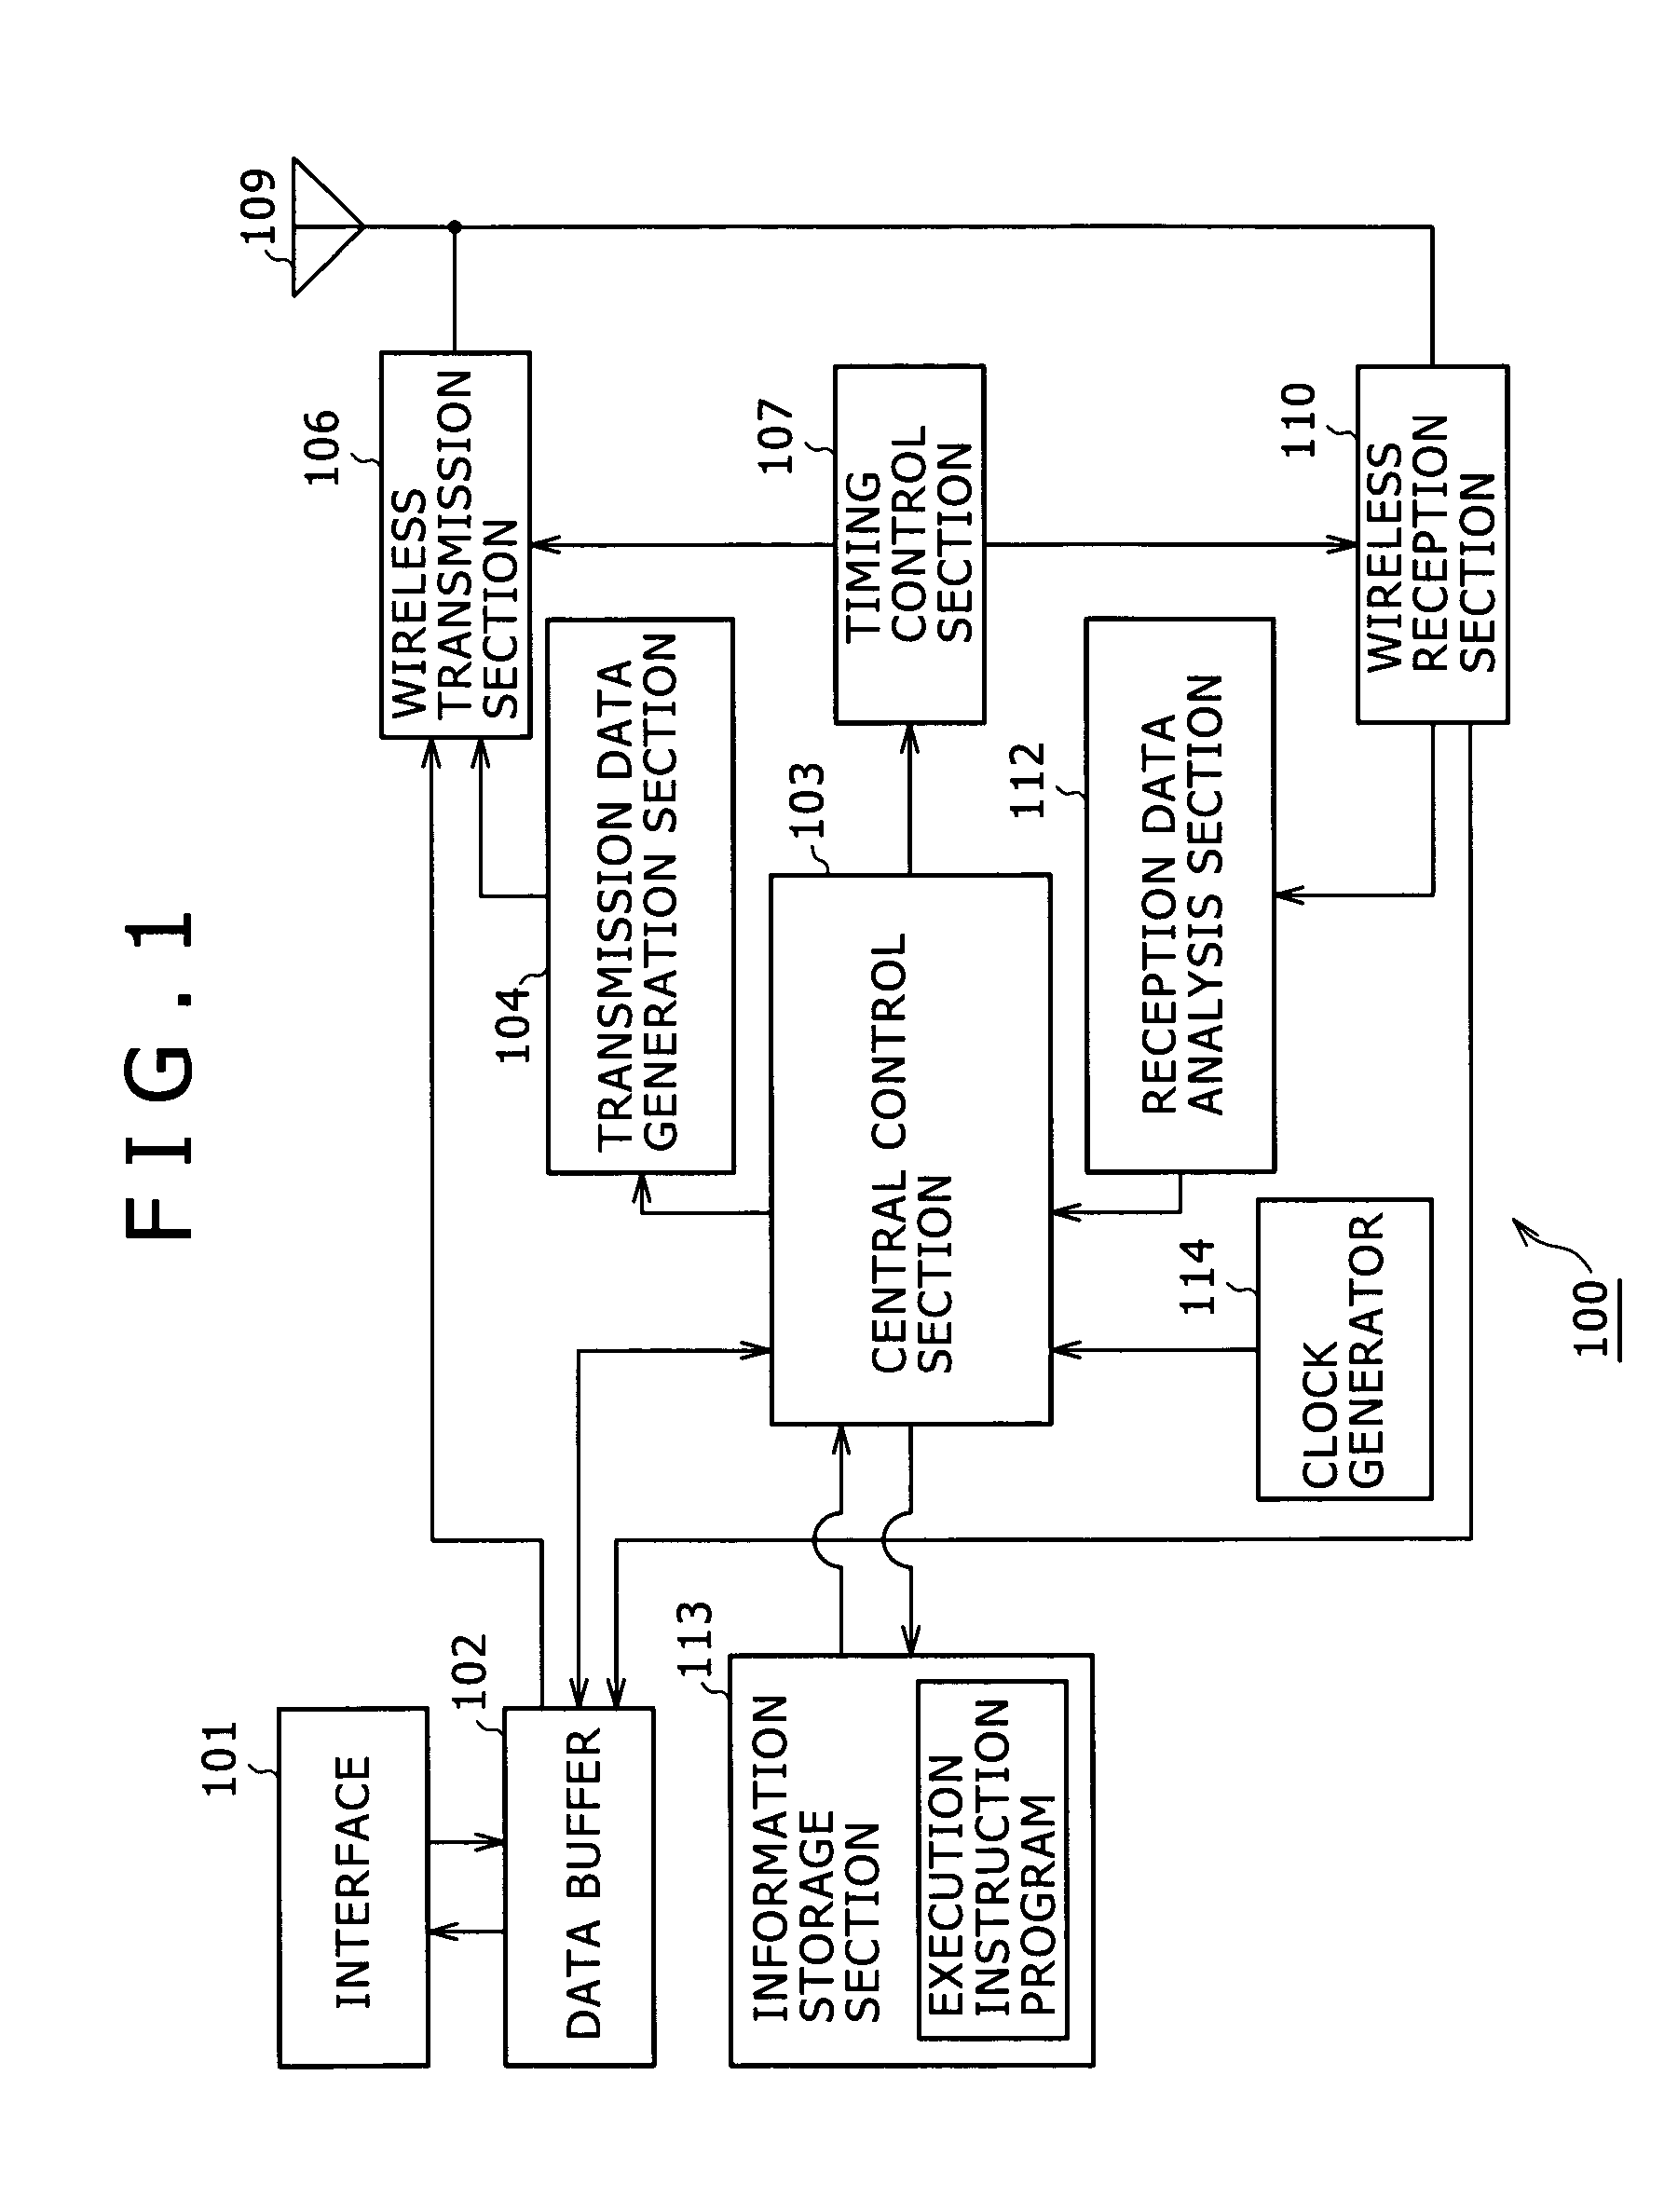 Wireless communication apparatus for synchronizing a frame cycle's beginning position in relation to other devices